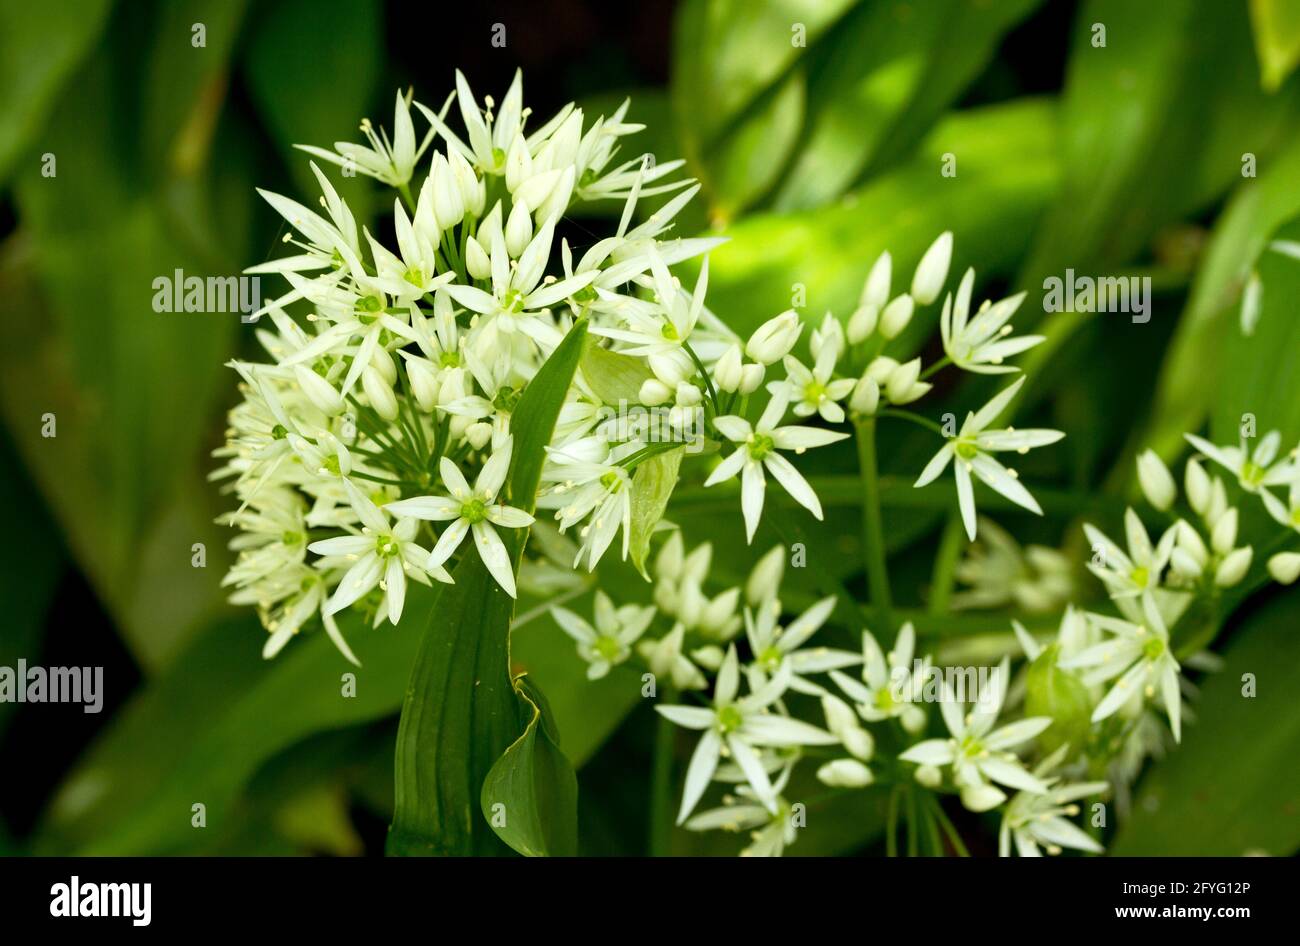 The floors of deciduous woodlands around the UK in late spring are carpeted in white with Ransom flowers and the garlic-like scent they exude Stock Photo